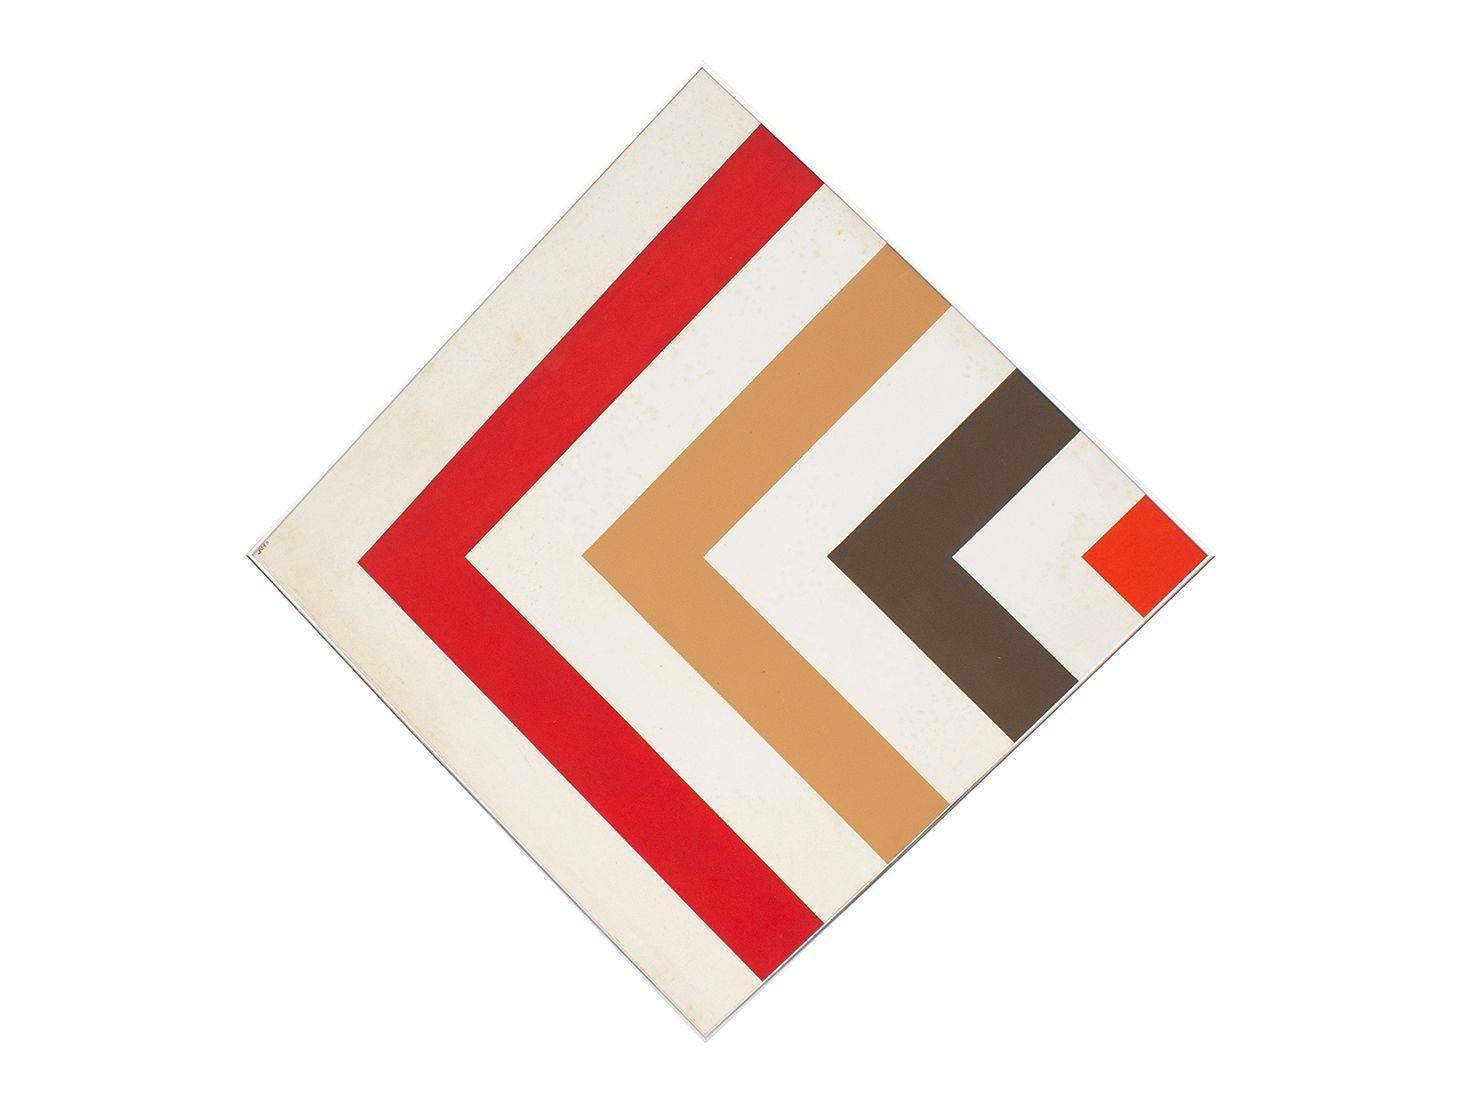 Late 20th Century Hard Edge Abstract Geometric Acrylic Painting Signed J.v. 80, circa 1980 For Sale